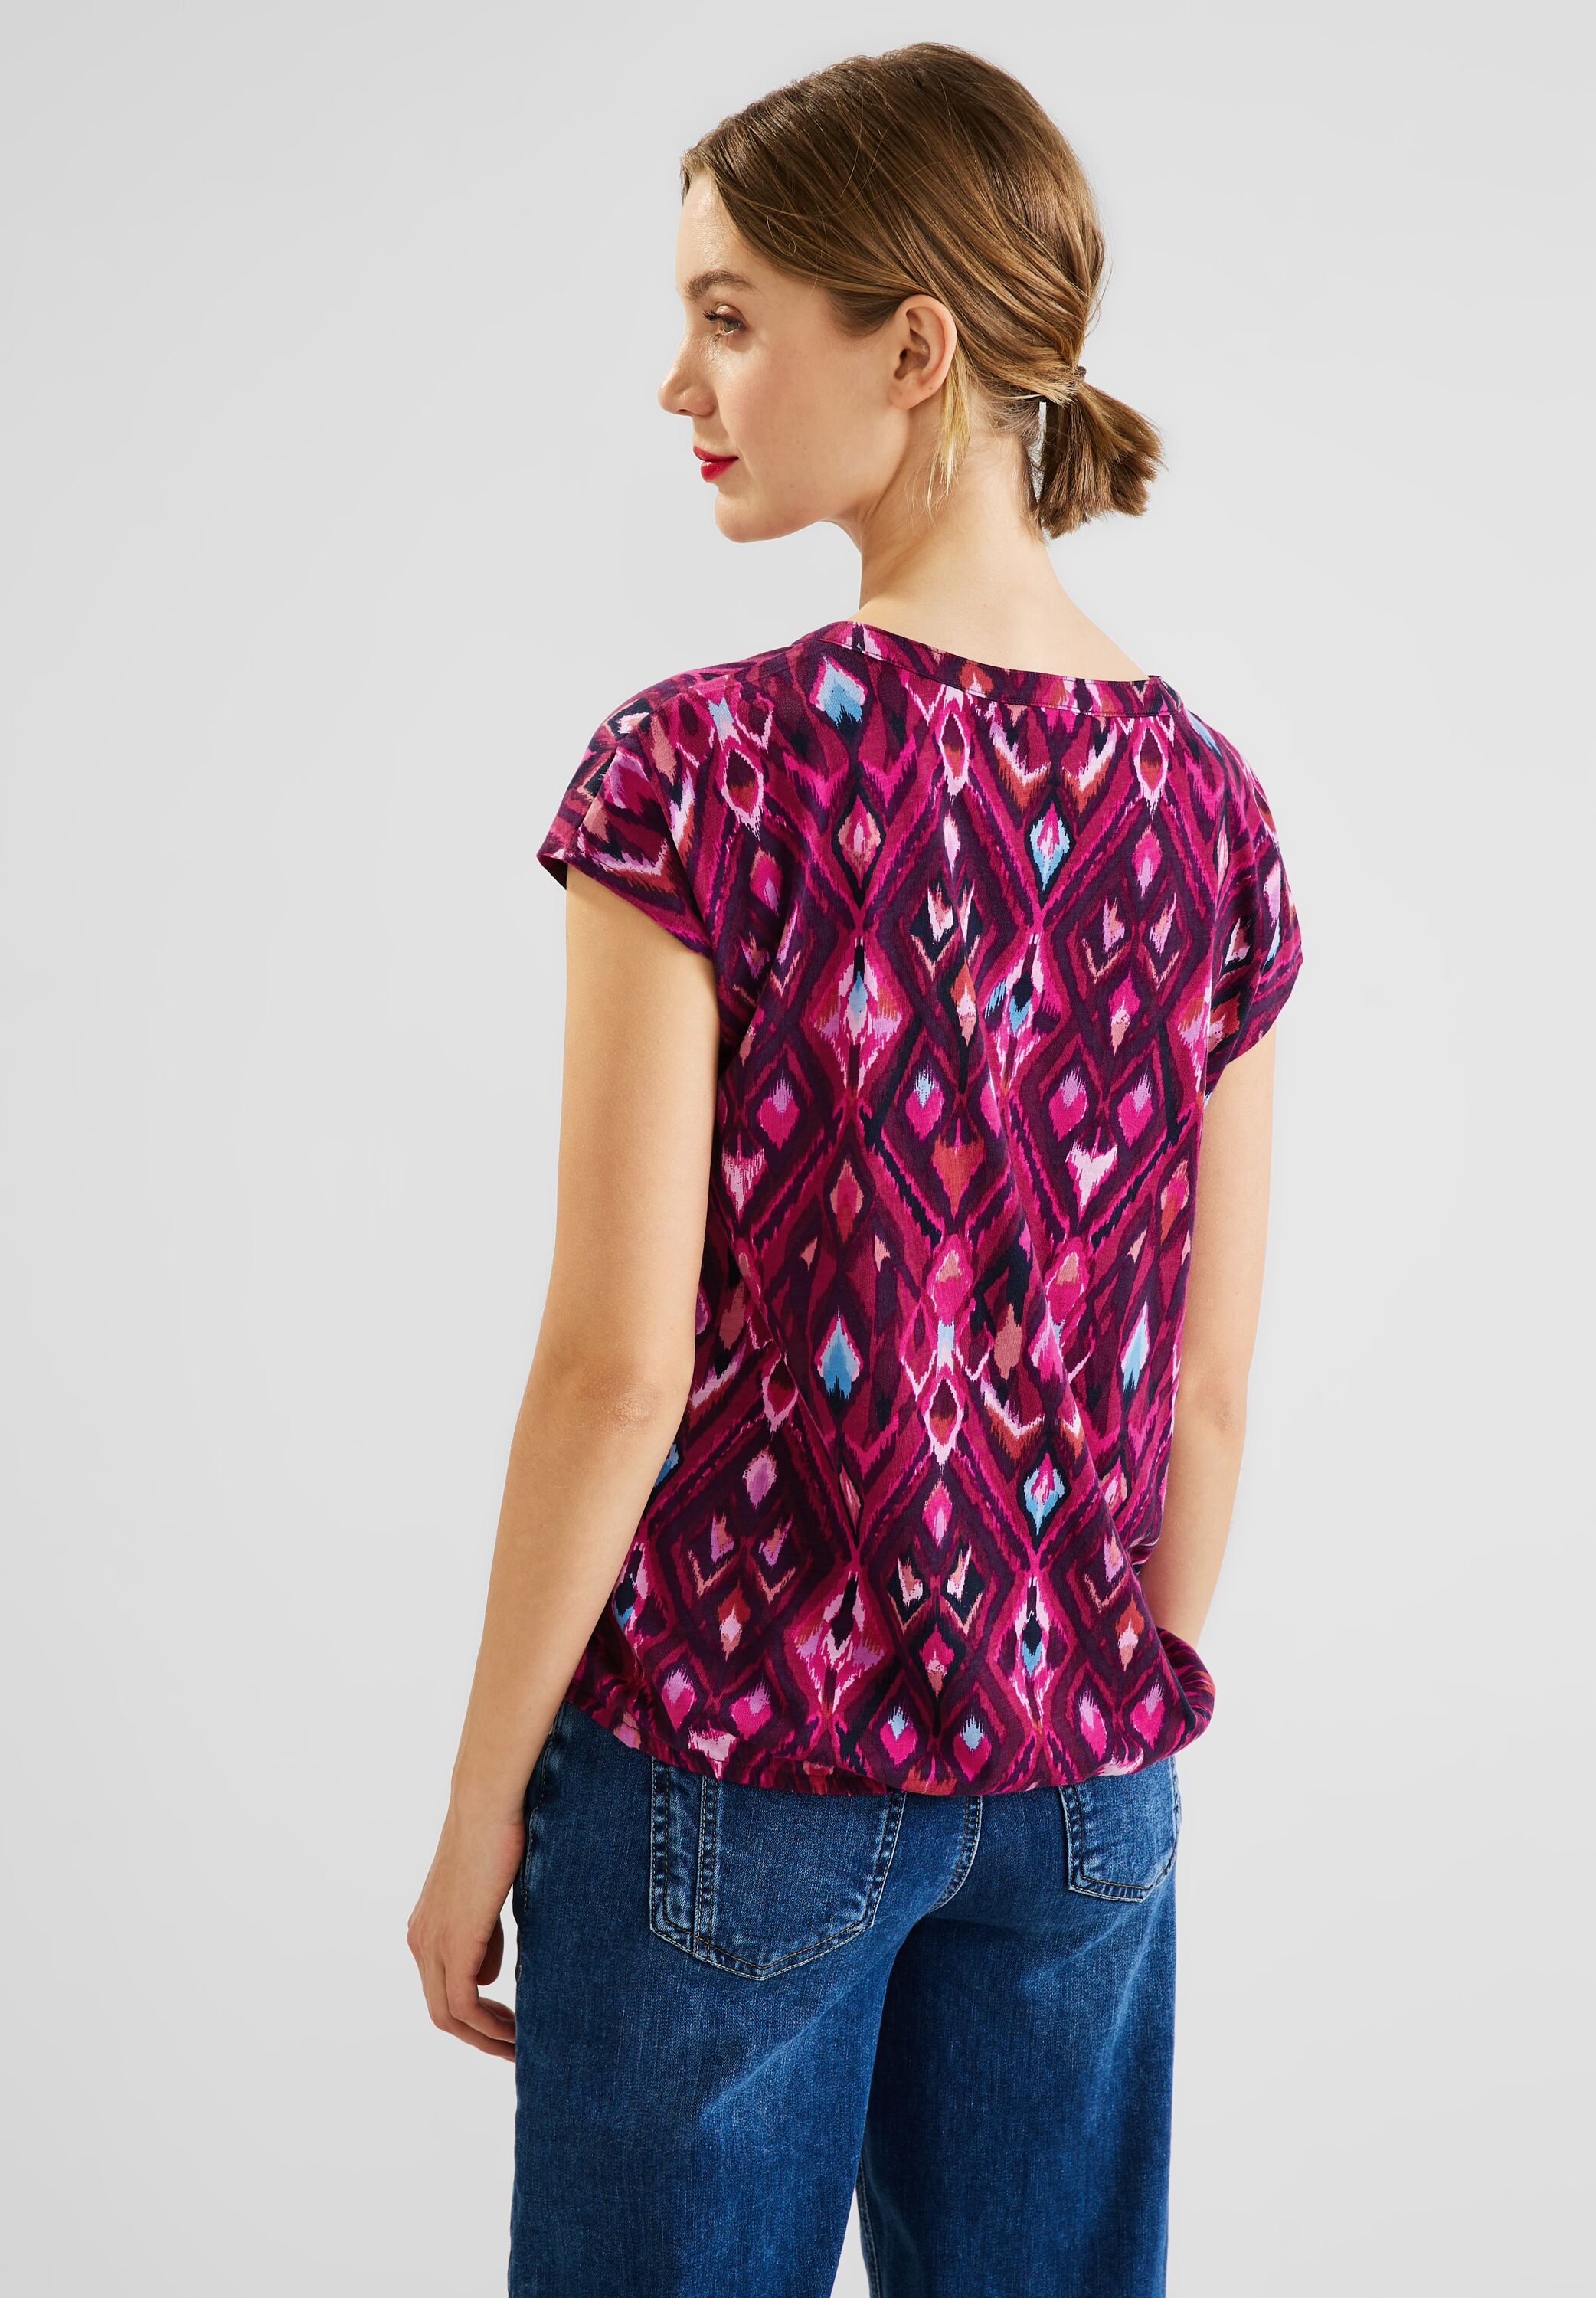 Street One T-Shirt in CONCEPT Tamed - A319605-34886 Berry Mode im reduziert SALE